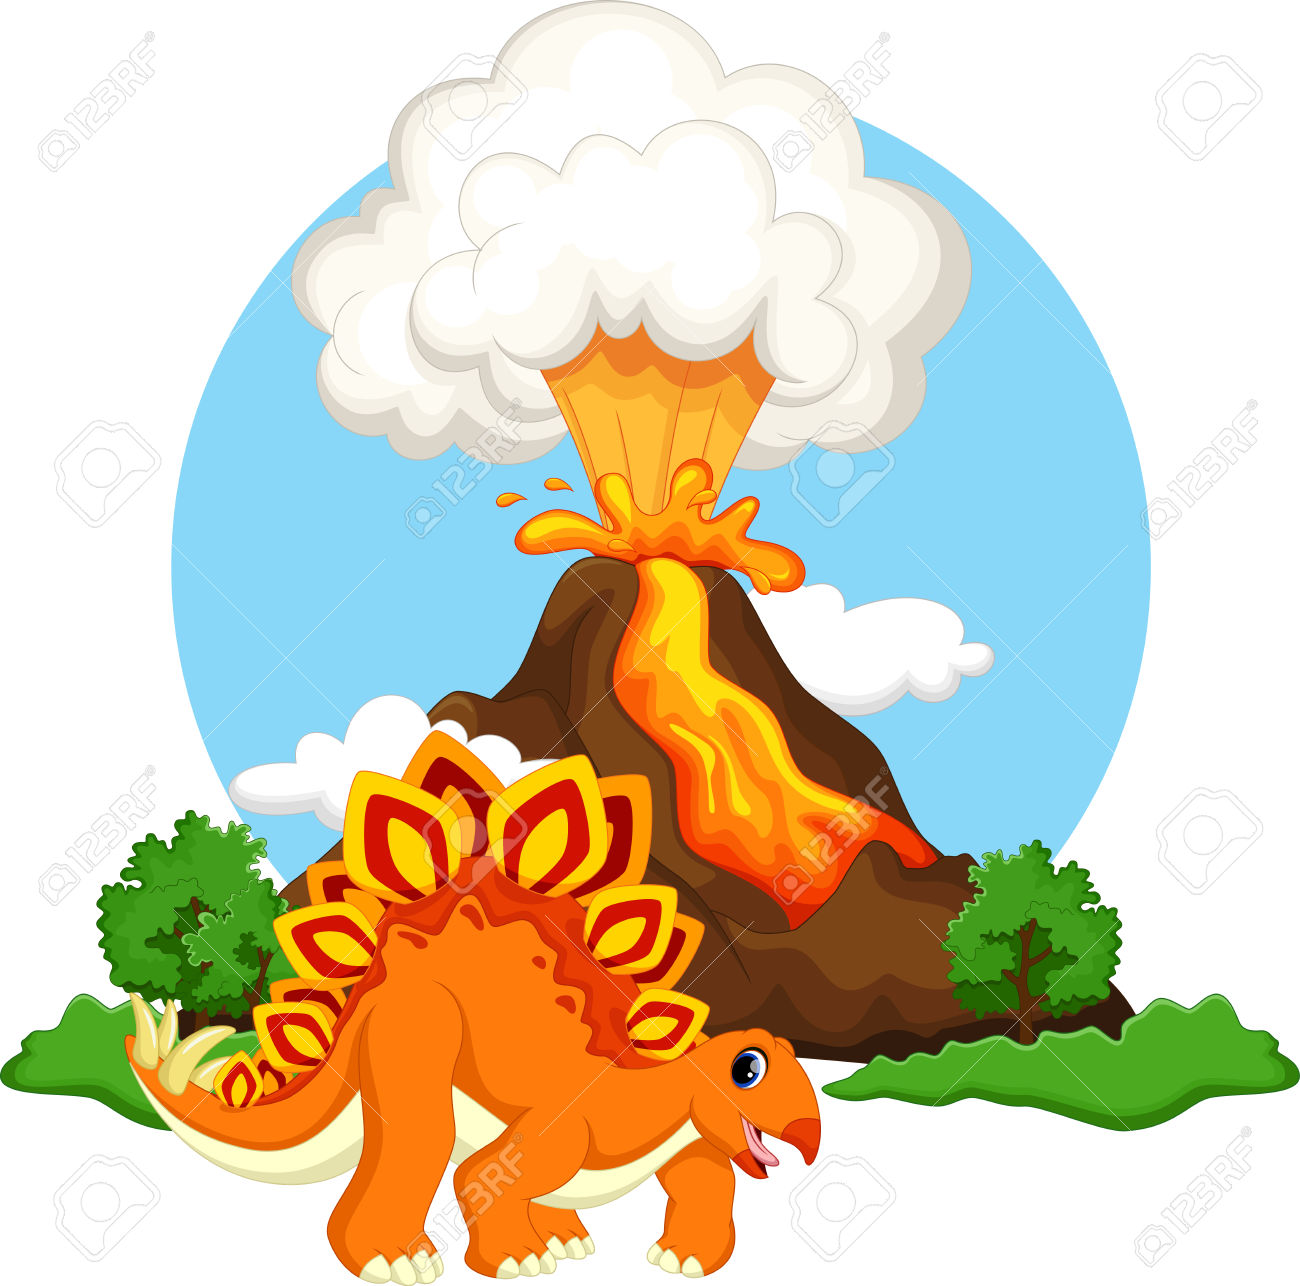 Dinosaurs clipart volcano. Images free download best